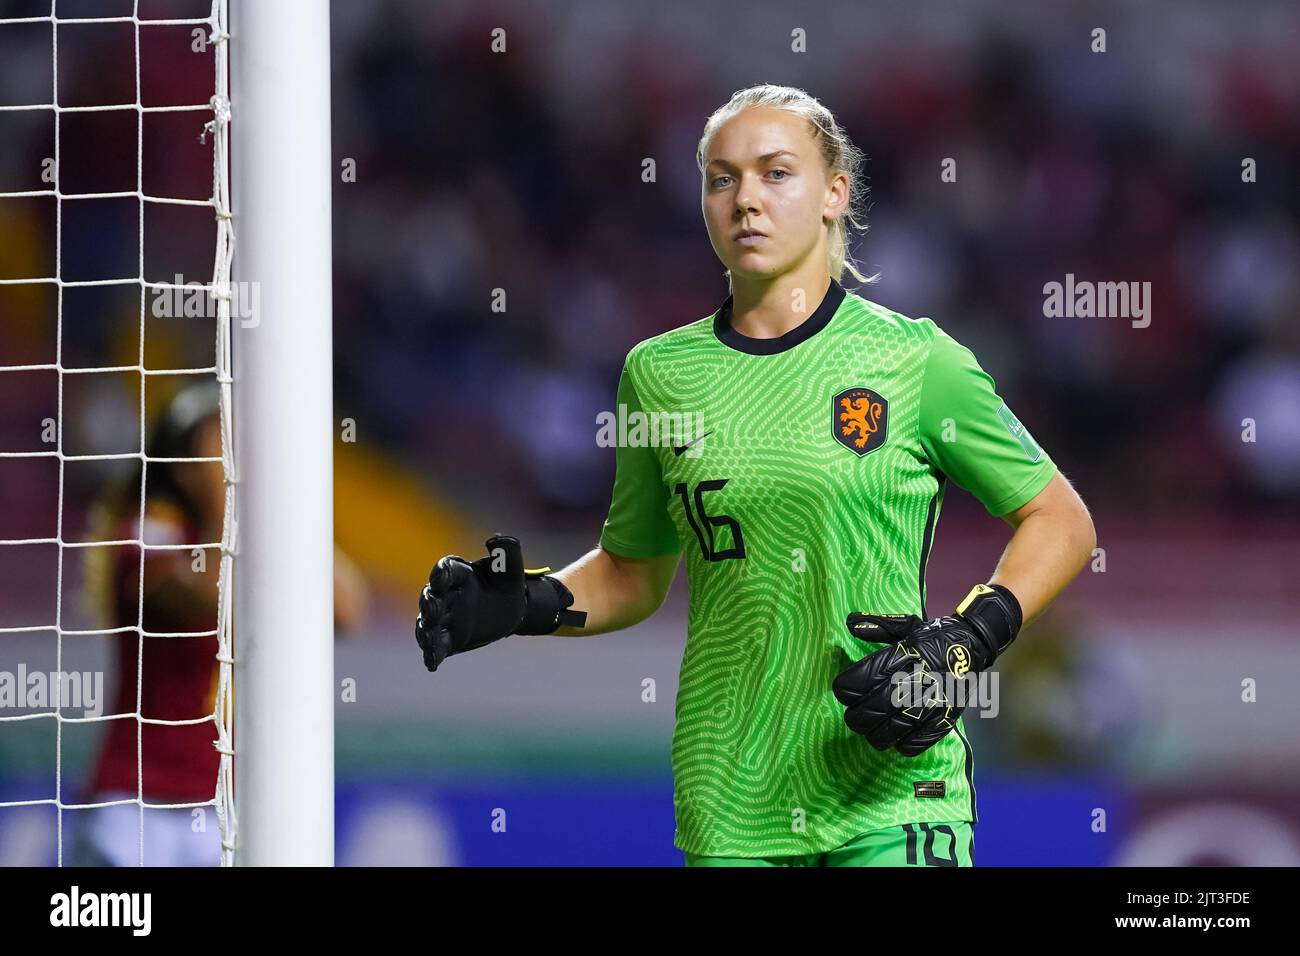 San Jose, Costa Rica. 25th Aug, 2022. San Jose, Costa Rica, August 25th 2022: Goalkeeper Lisan Alkemade (16 Netherlands) looks on during the FIFA U20 Womens World Cup Costa Rica 2022 football semifinal match between Spain and Netherlands at Estadio Nacional in San Jose, Costa Rica. (Daniela Porcelli/SPP) Credit: SPP Sport Press Photo. /Alamy Live News Stock Photo